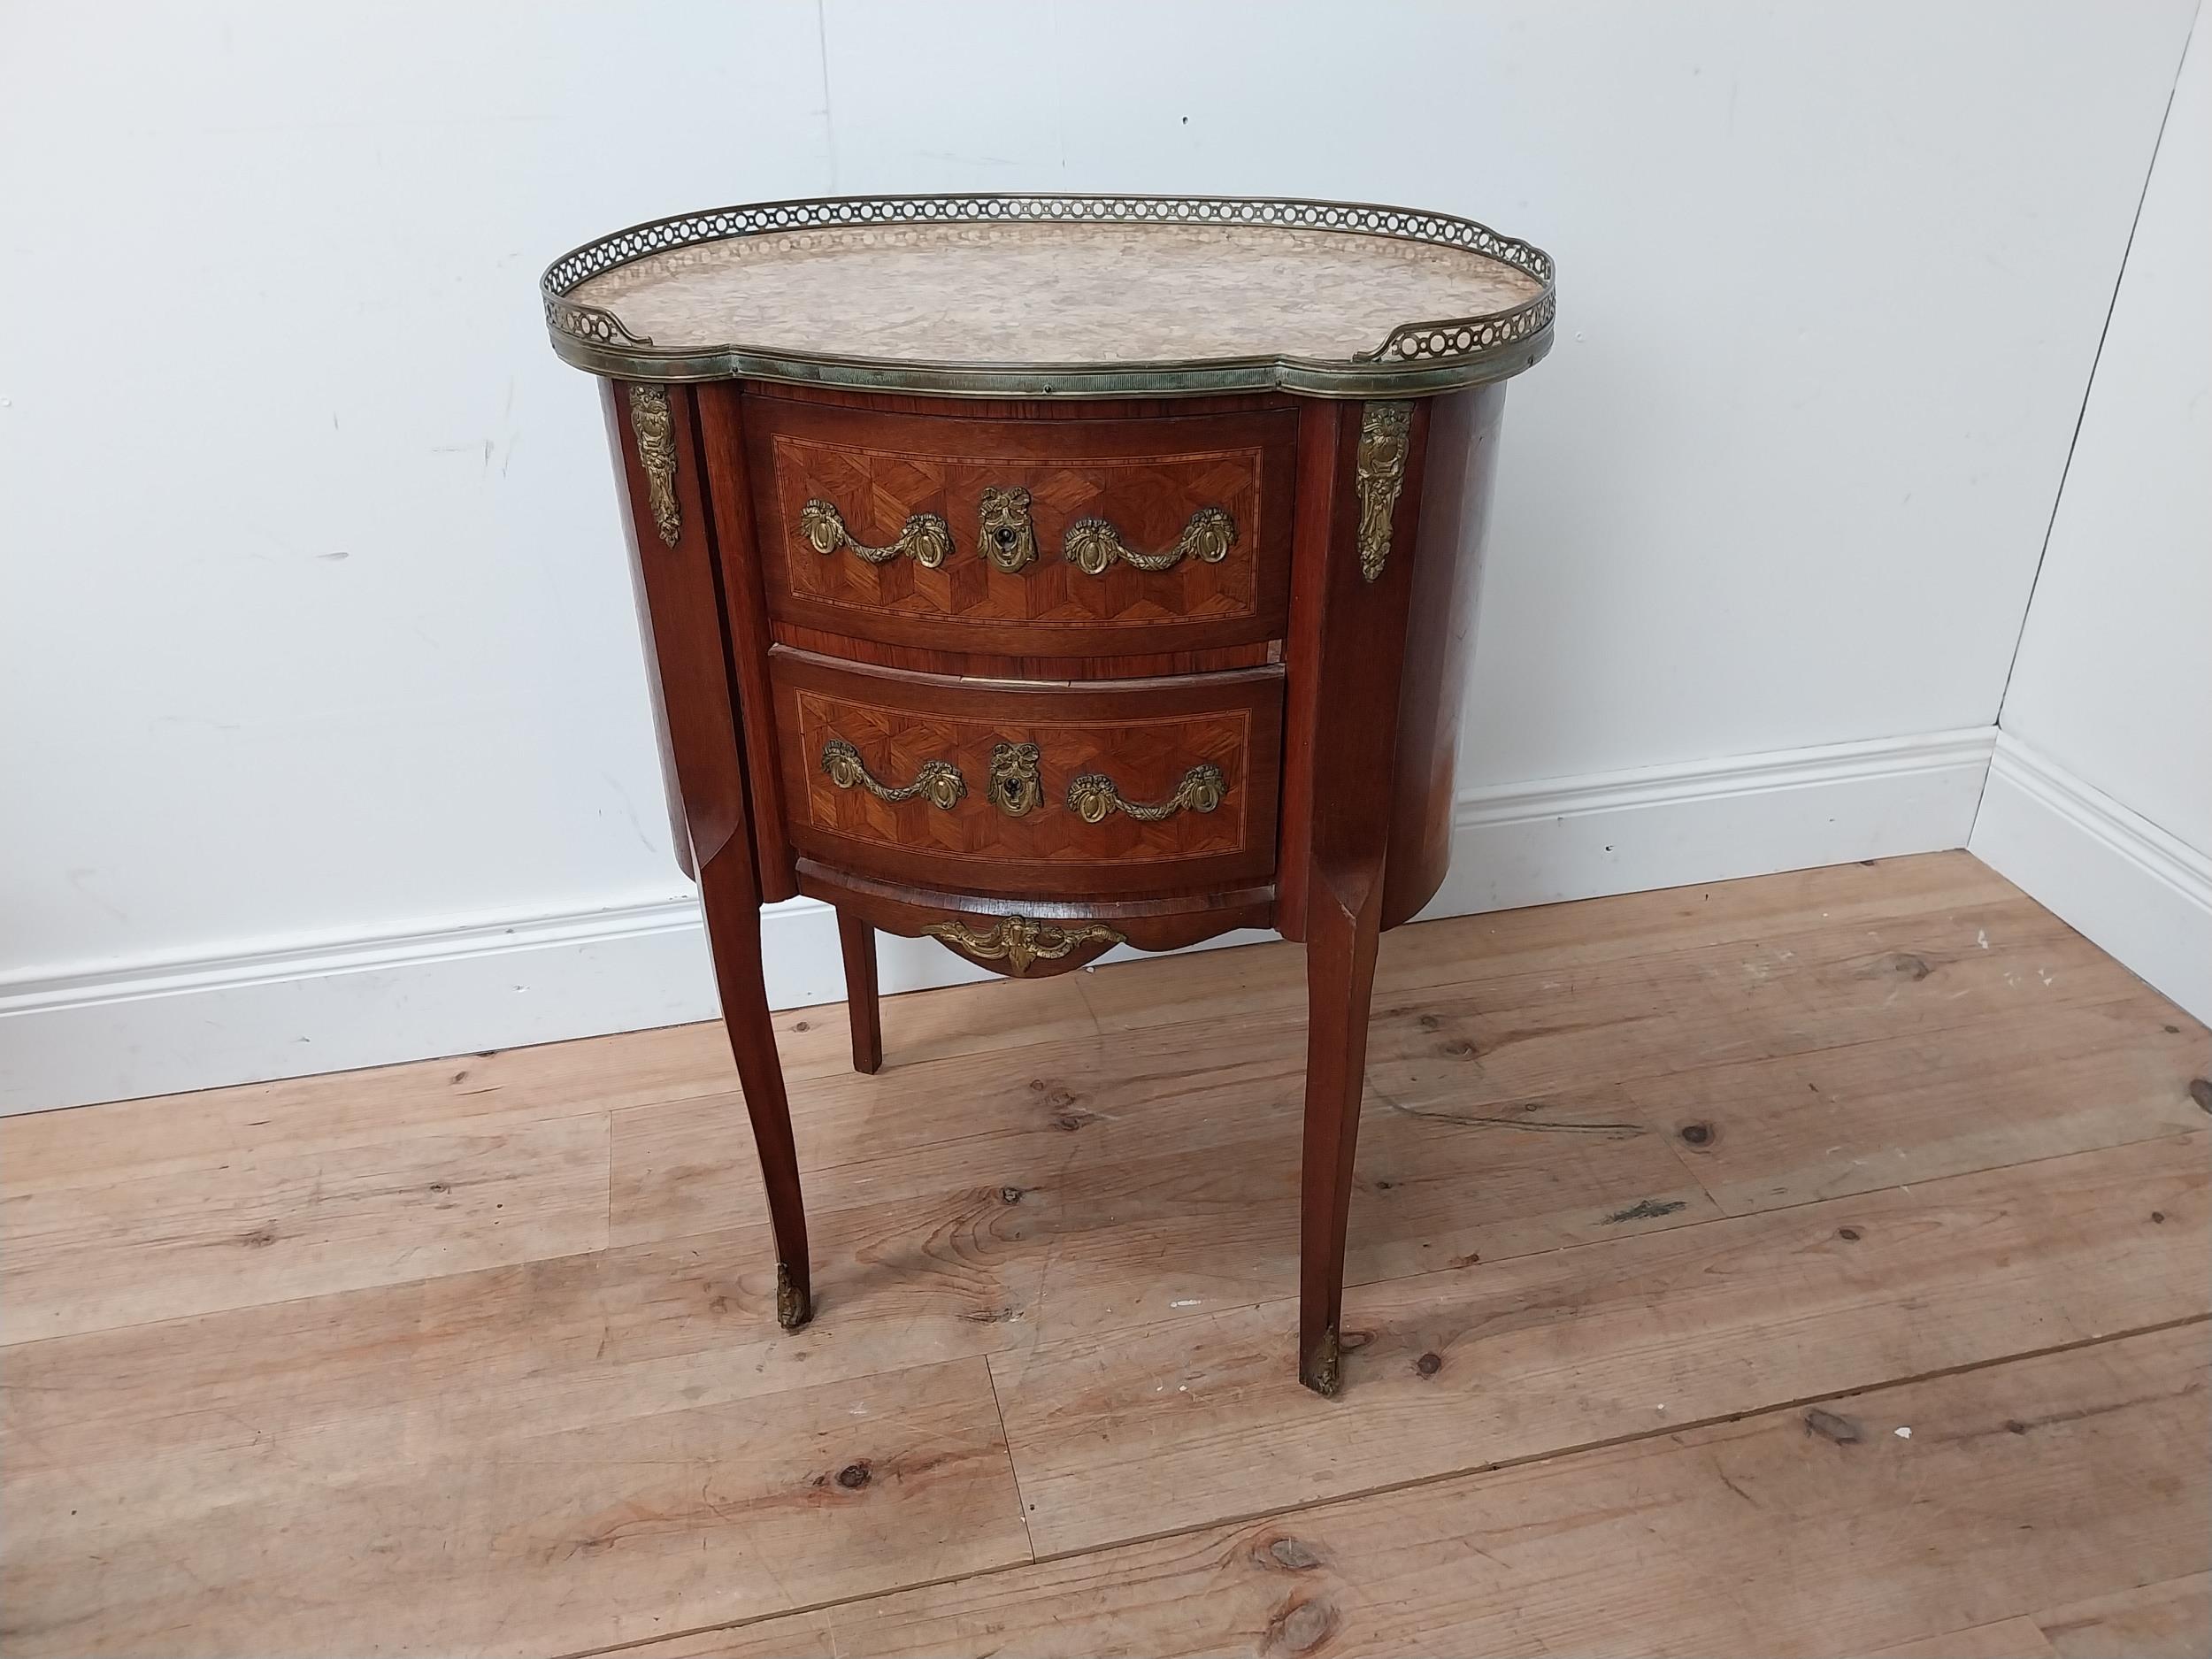 19th C. kidney shaped side cabinet with marble top, brass gallery and ormolou mounts with two